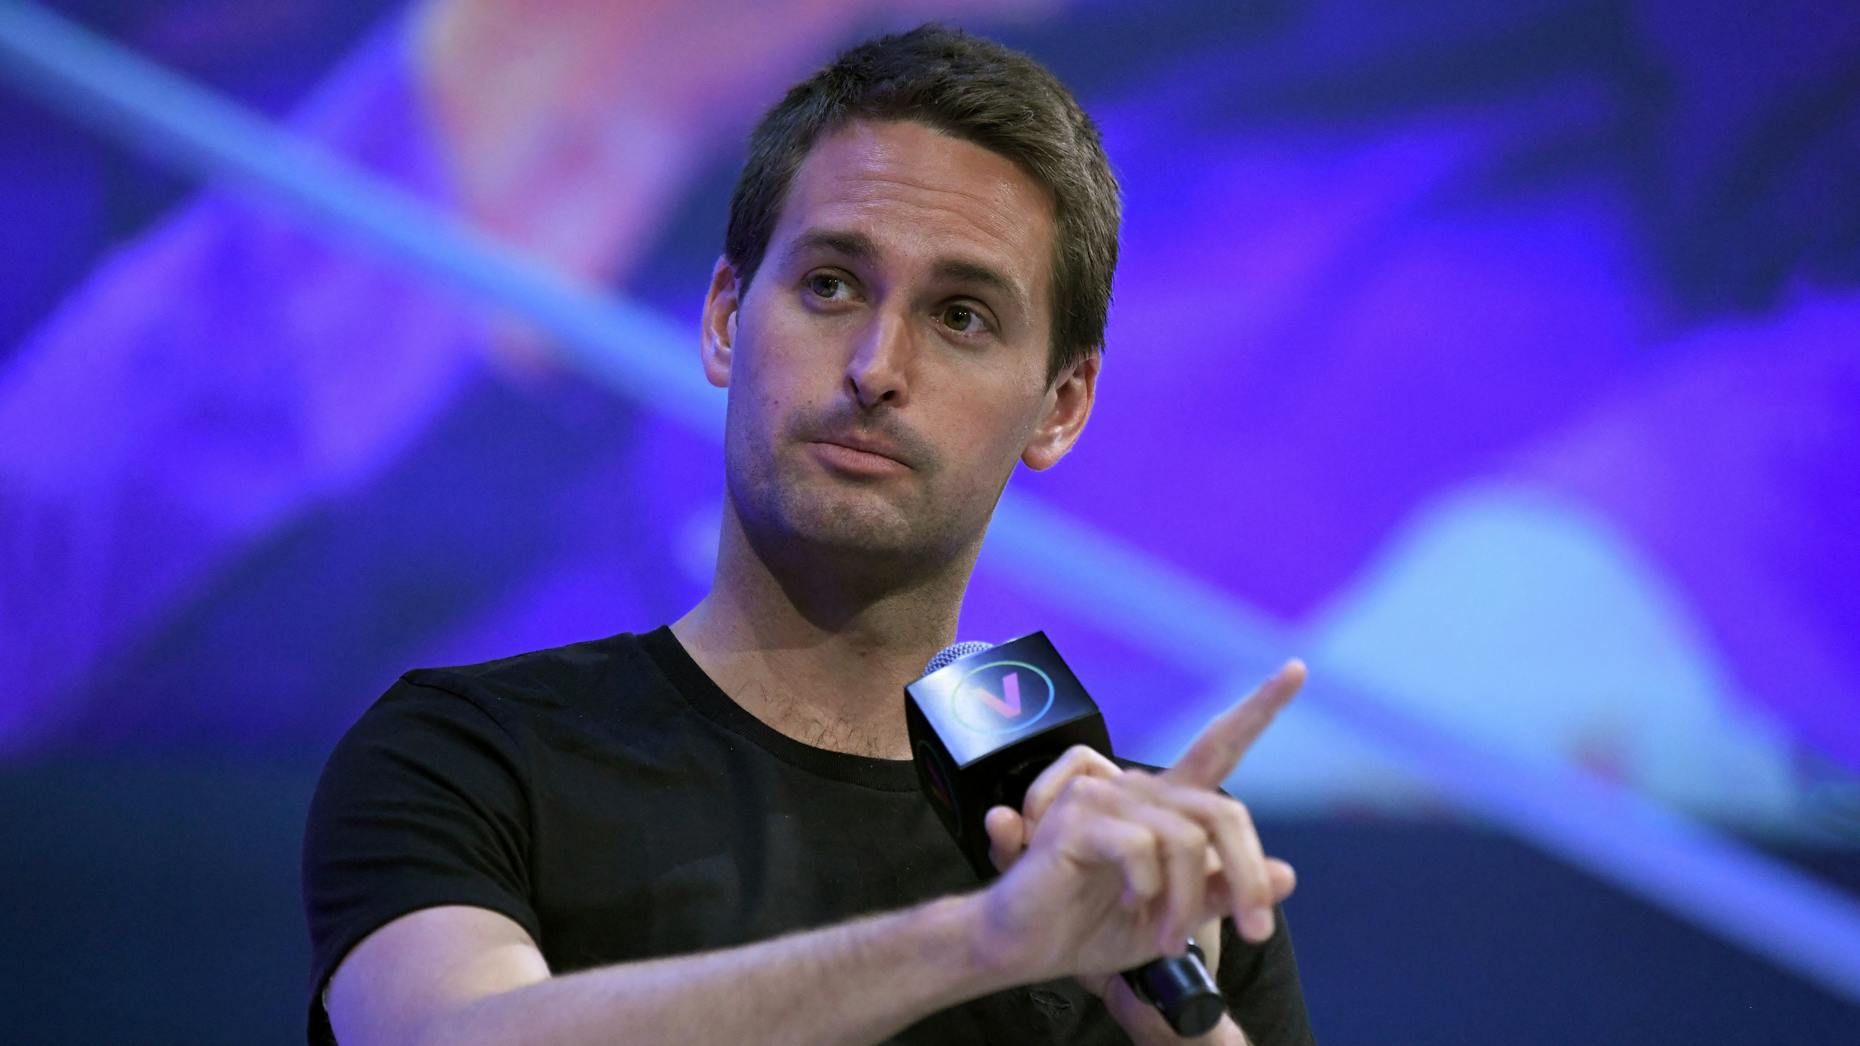 To Revive Snap, Evan Spiegel Promotes Hardcore Work Culture — The